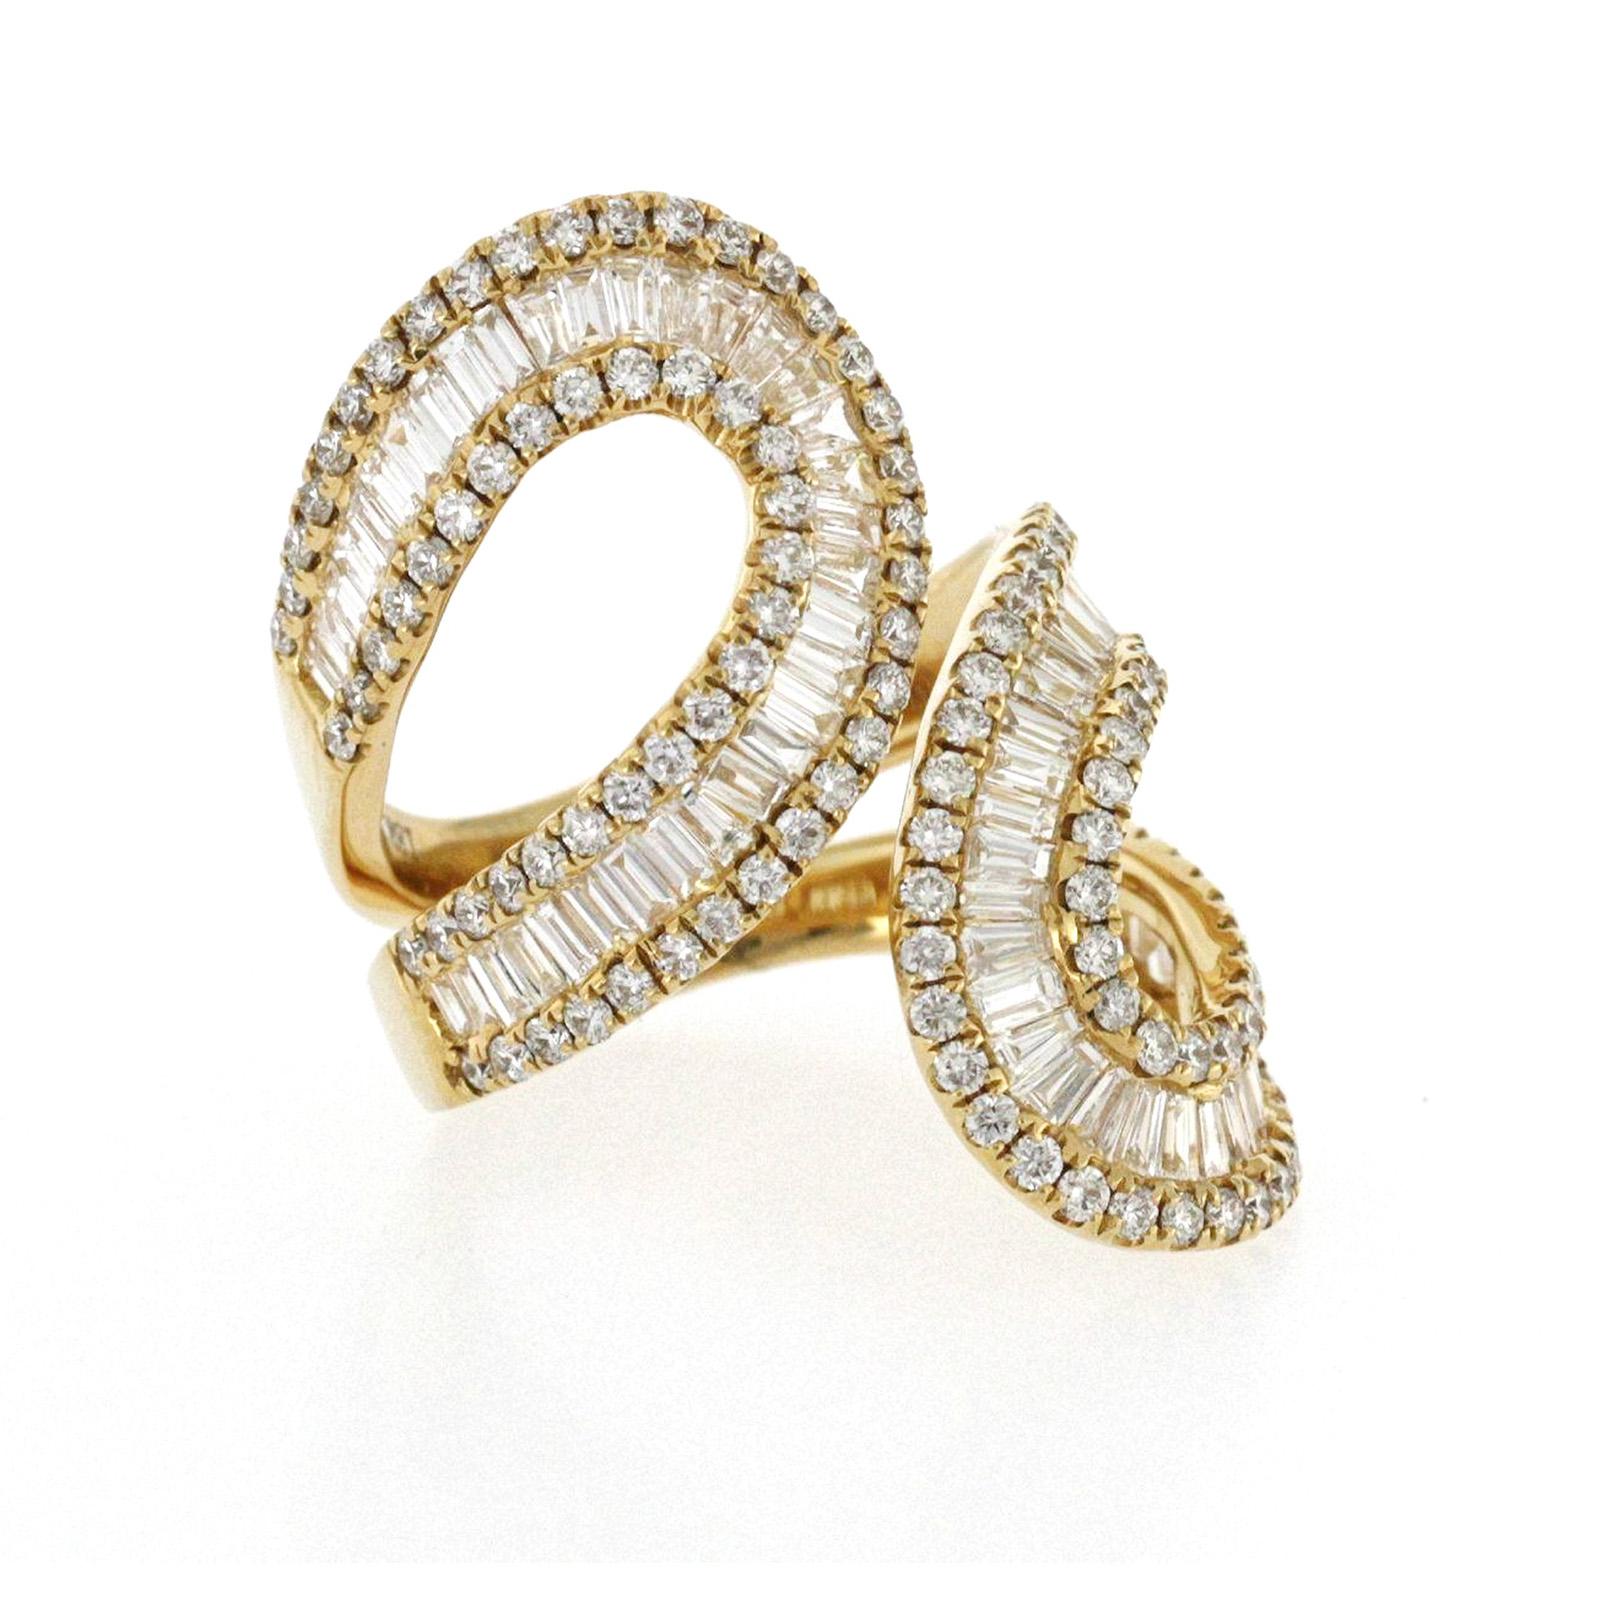 Fancy 18 Karat Yellow Gold 3.79 Carat Diamond Wrap Ring In Excellent Condition For Sale In Los Angeles, CA